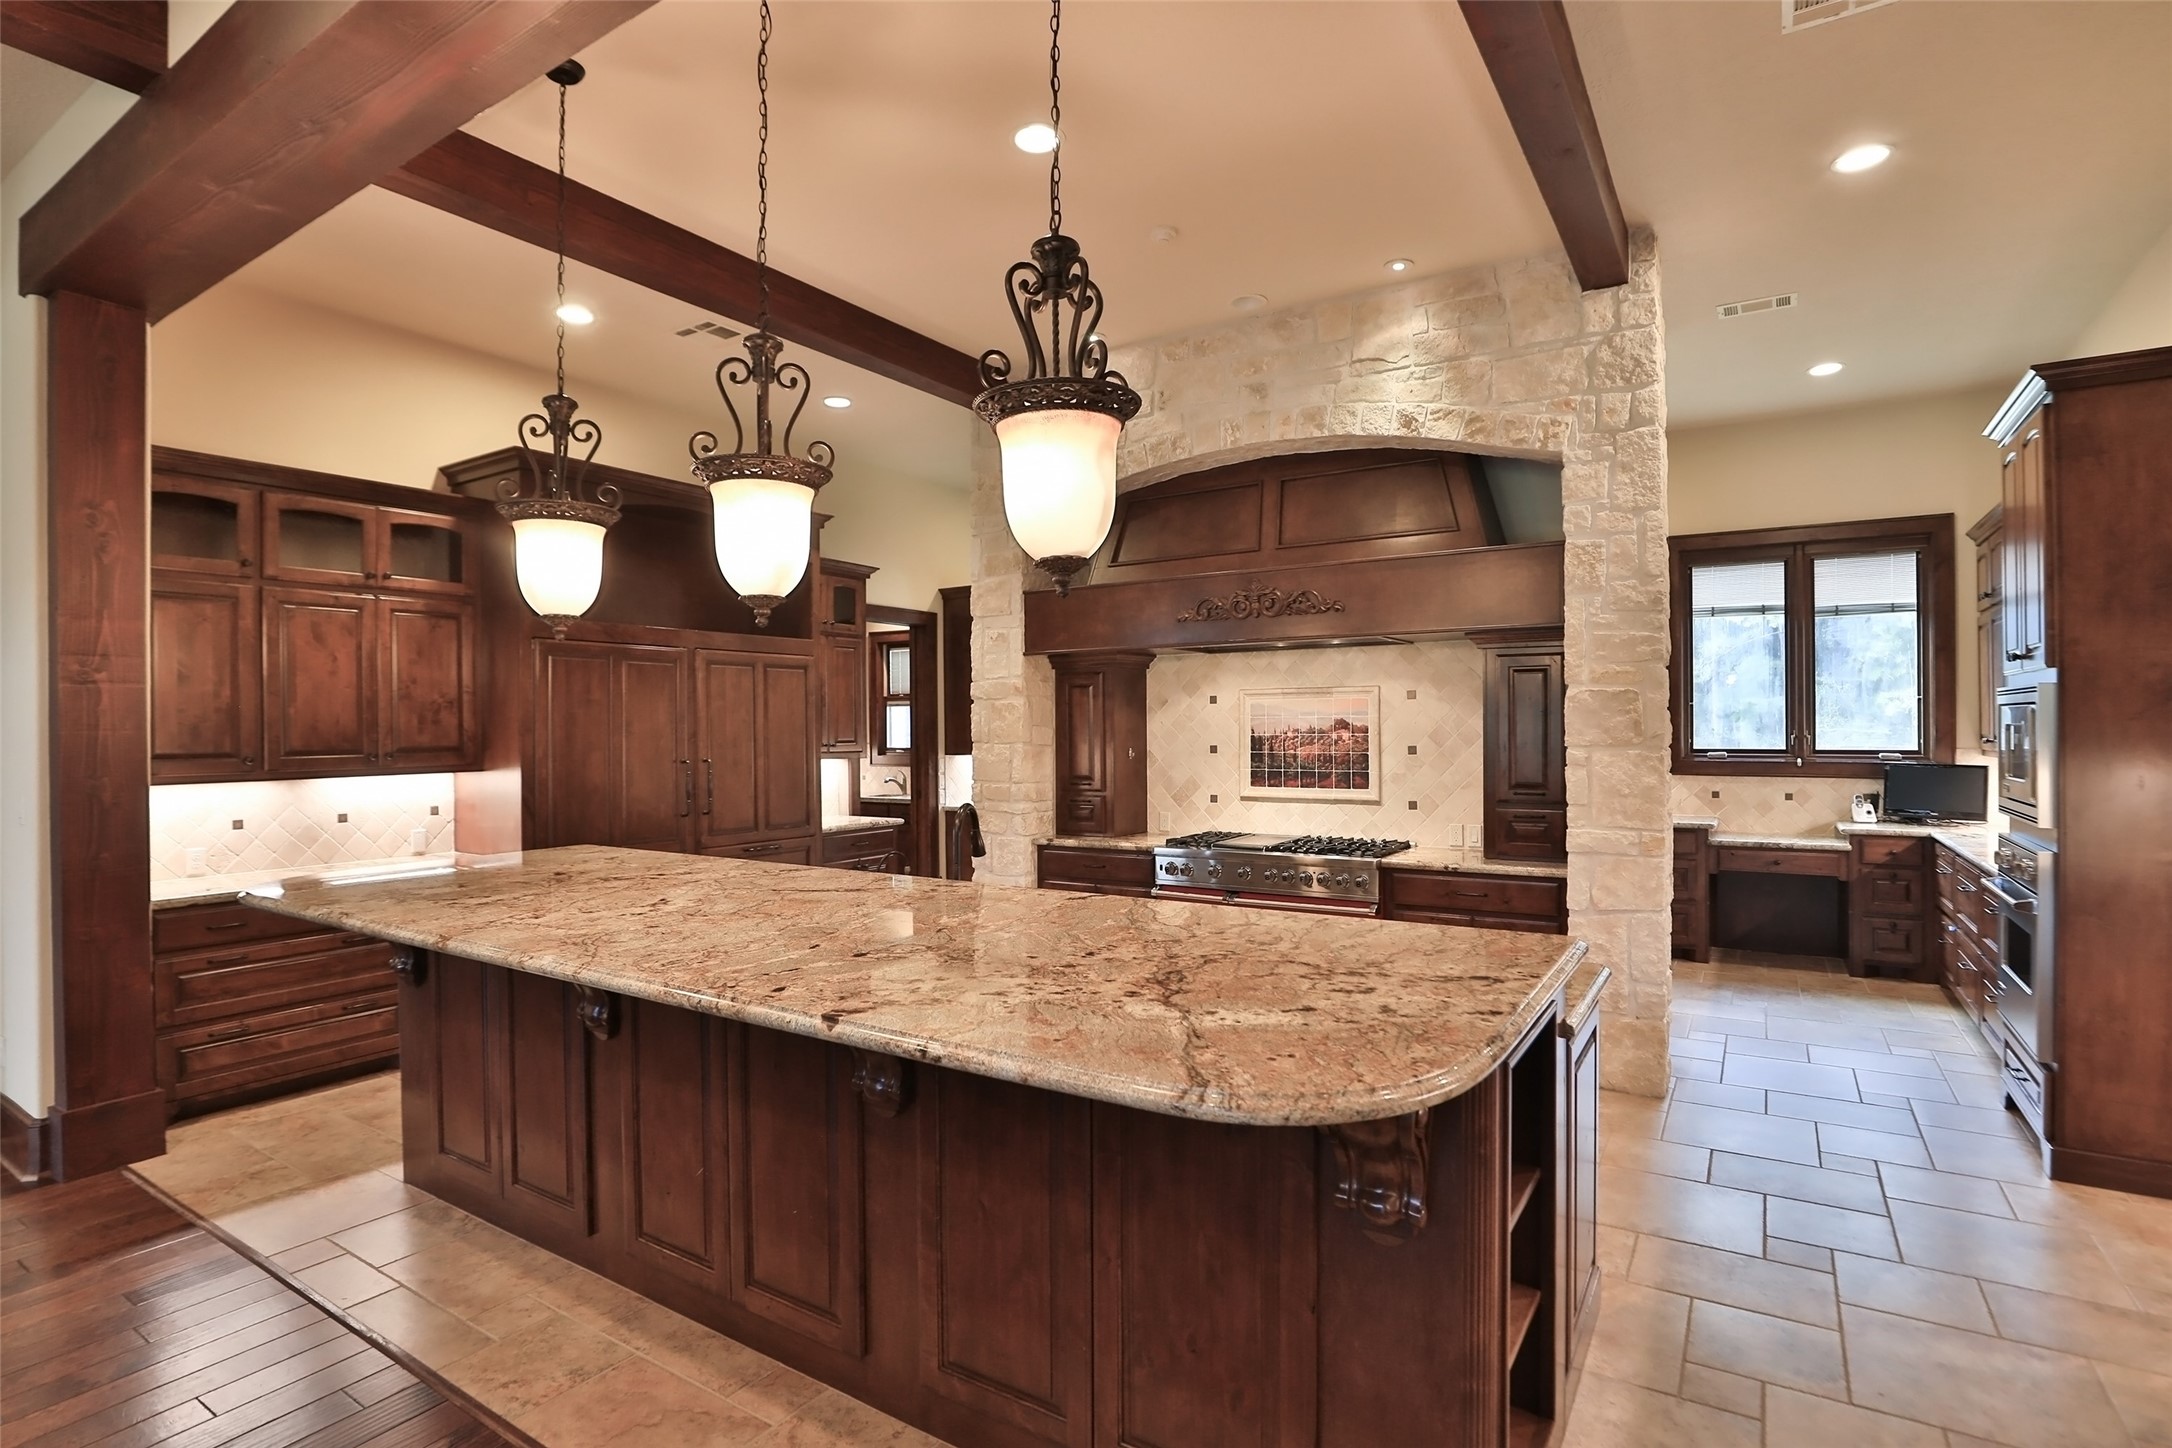 This gourmet kitchen will impress the Chef in the family. Spectacular granite counters, spacious breakfast bar, unique light fixtures tons of custom cabinets.